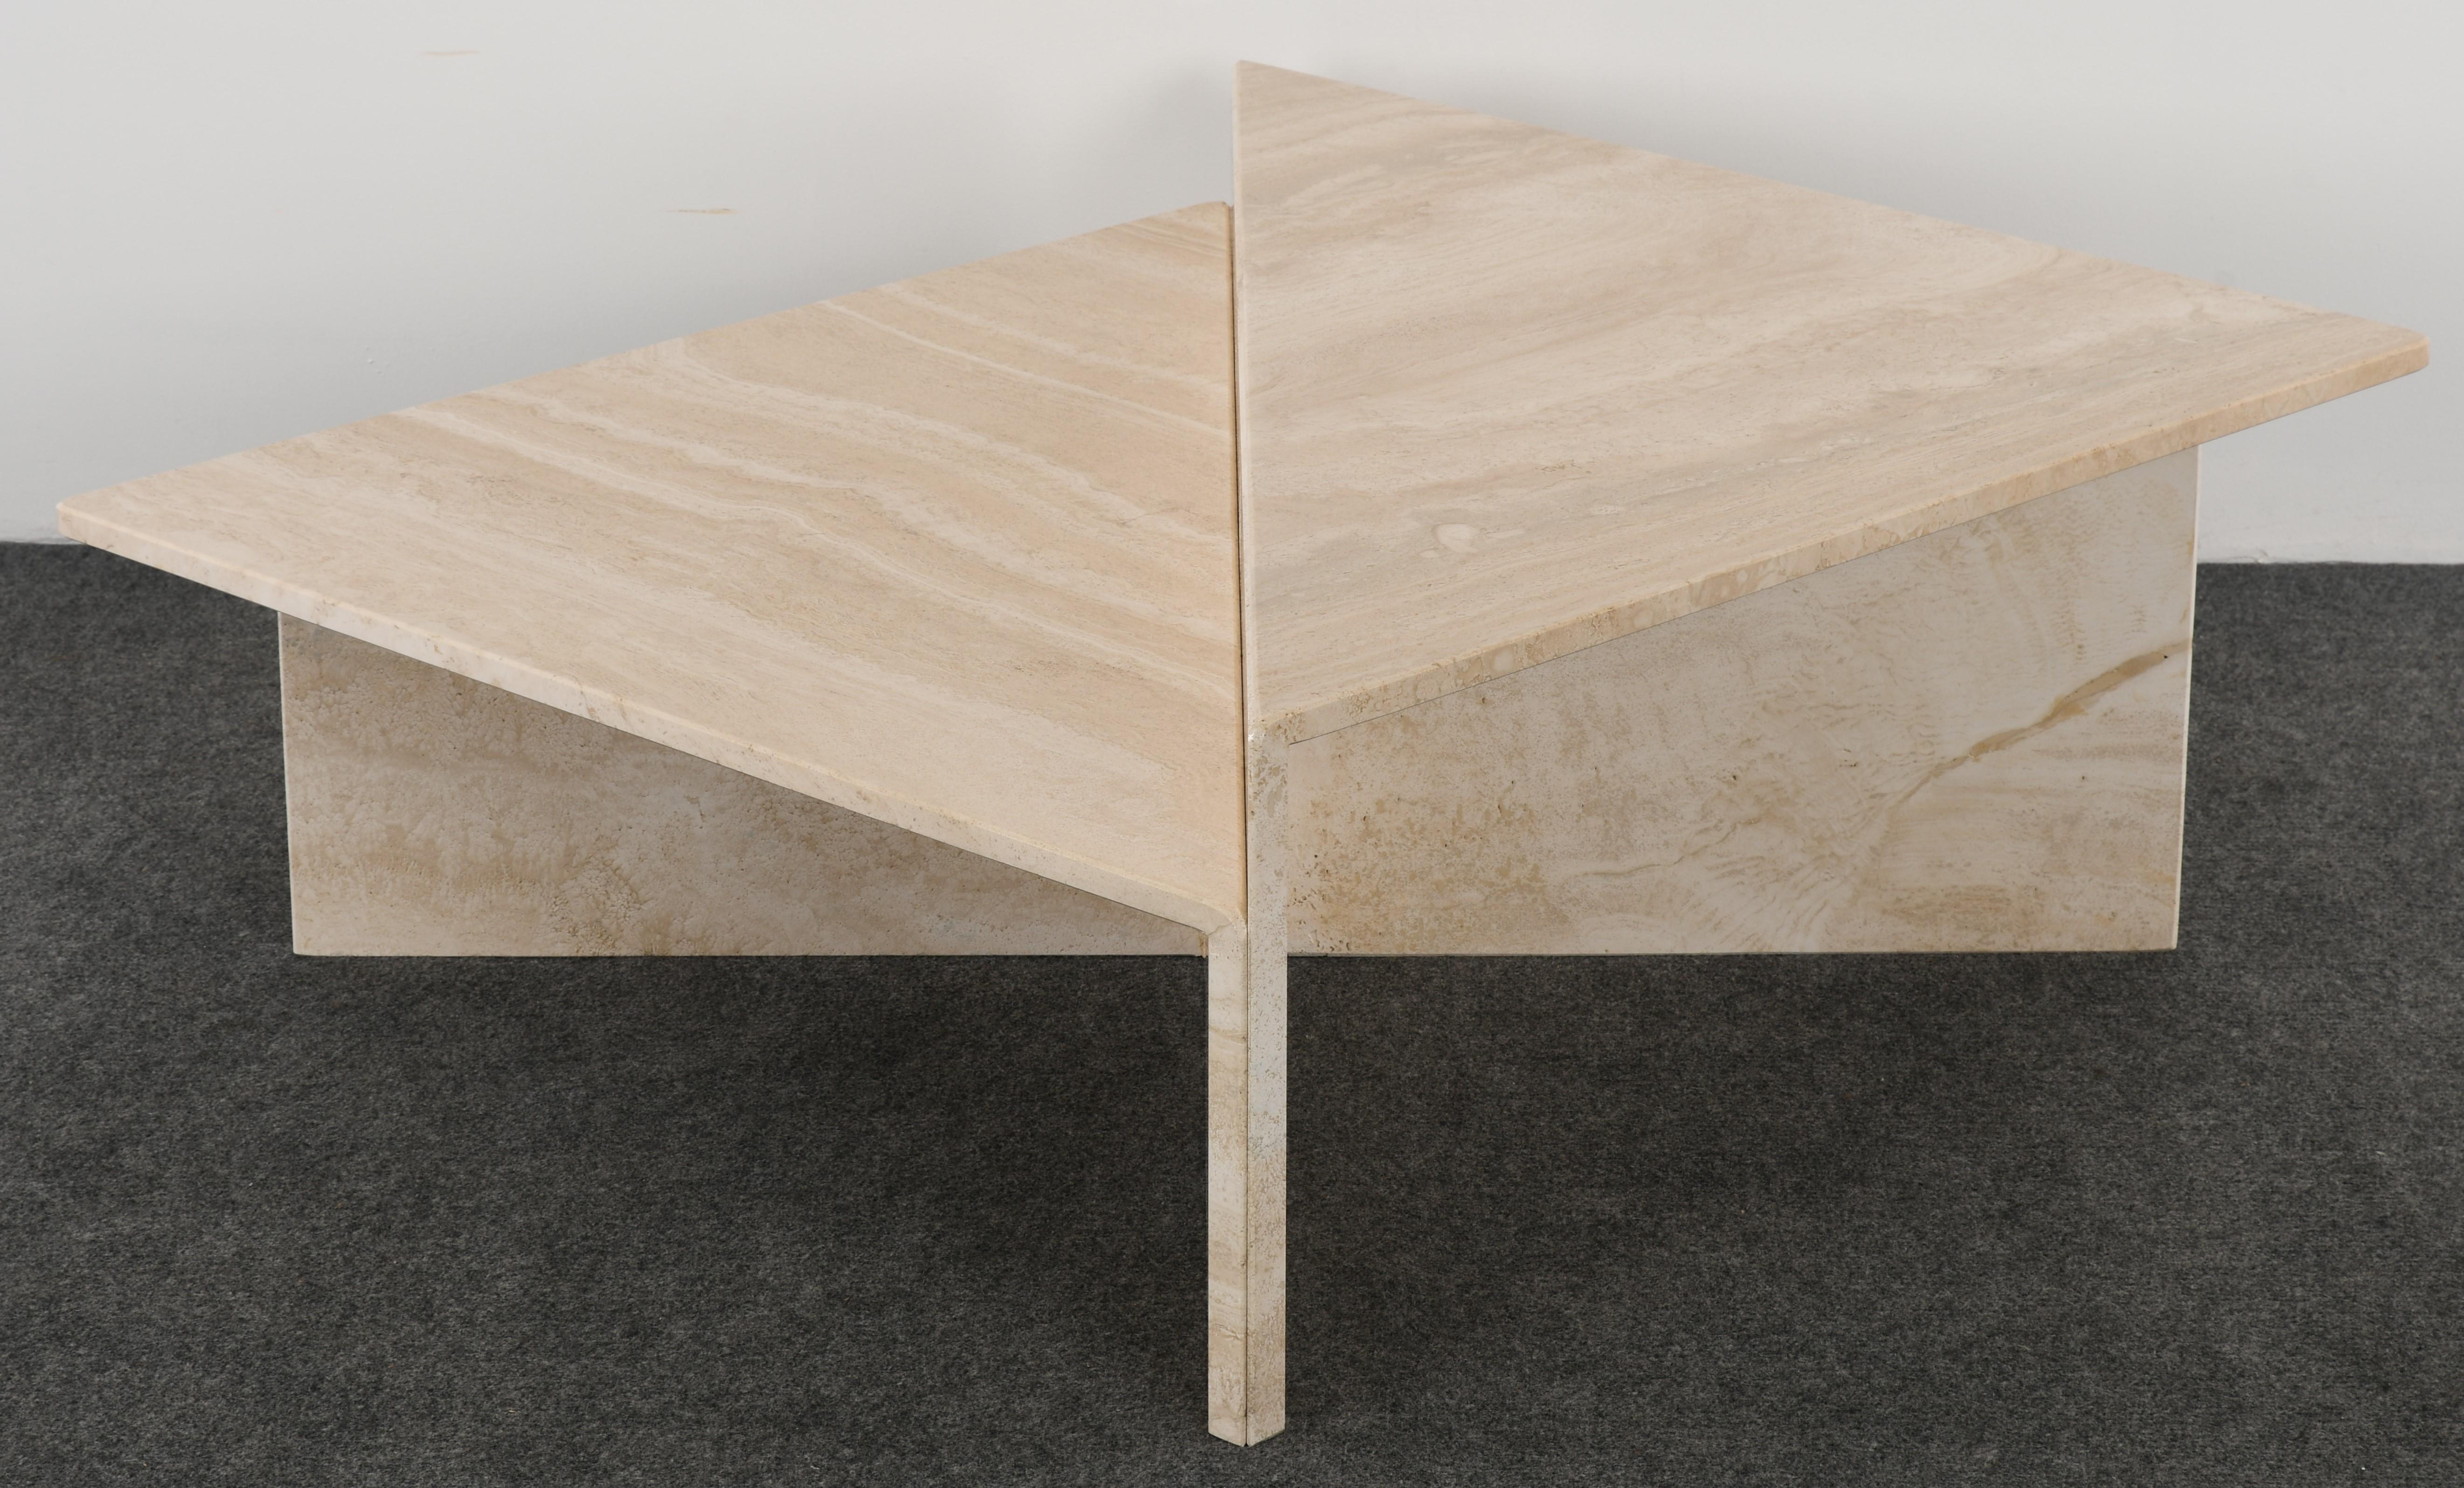 A Roche Bobois style two piece architecturally designed travertine marble two-tiered coffee table. This unique and versatile cocktail table or coffee table set can be used in a modern or traditional setting. In good condition with age-appropriate